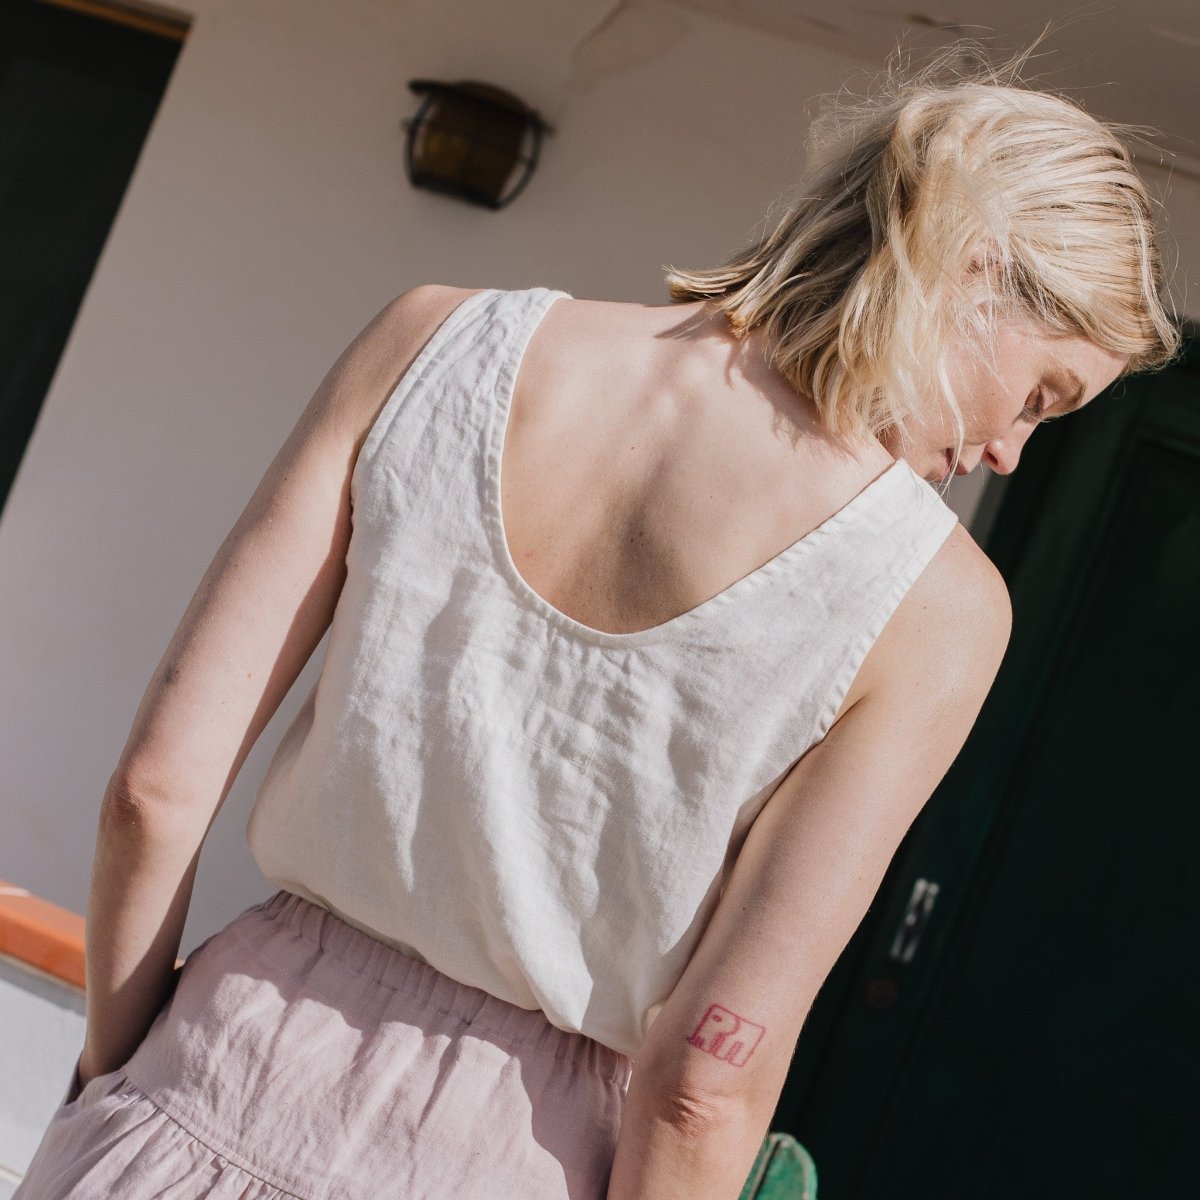 Linen Tank Top - PORTO Relaxed Fit